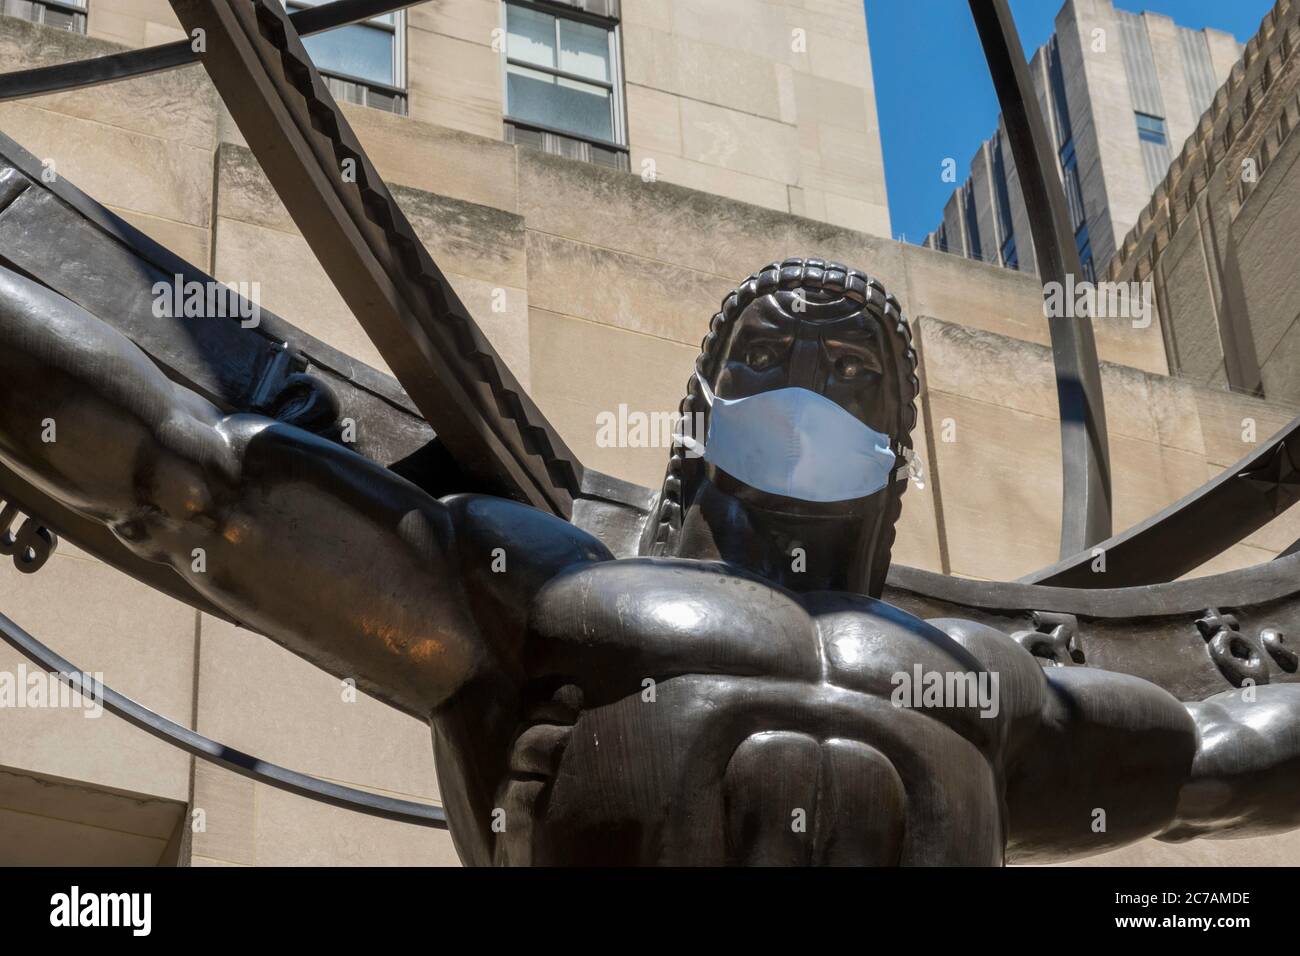 Ancient Greek Titan Atlas Holding the Heavens Bronze Armillary Sphere Sculpture in Rockefeller Center wearing a face mask due to COVID-19, NYC, USA Stock Photo